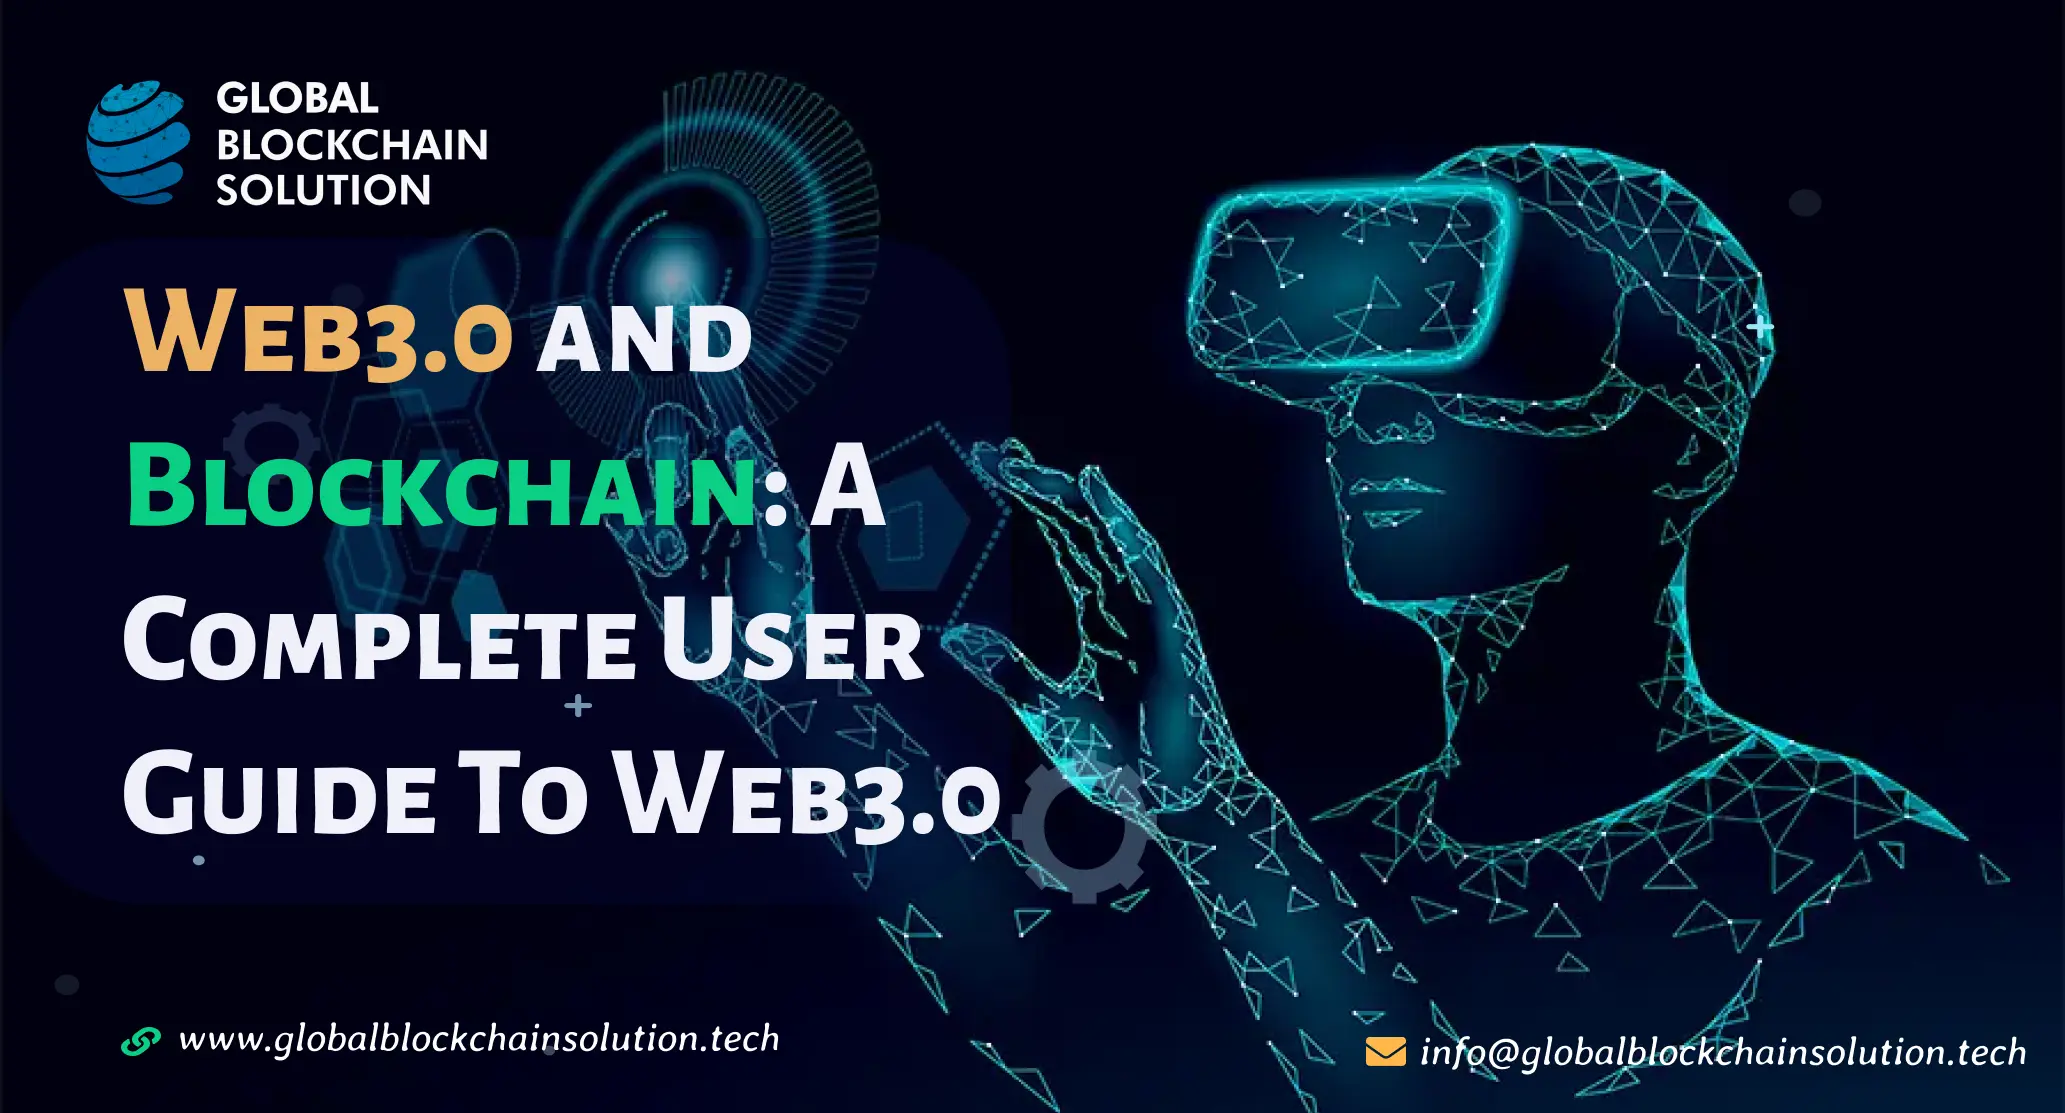 Web3.0 and Blockchain: How Are They Interlinked?